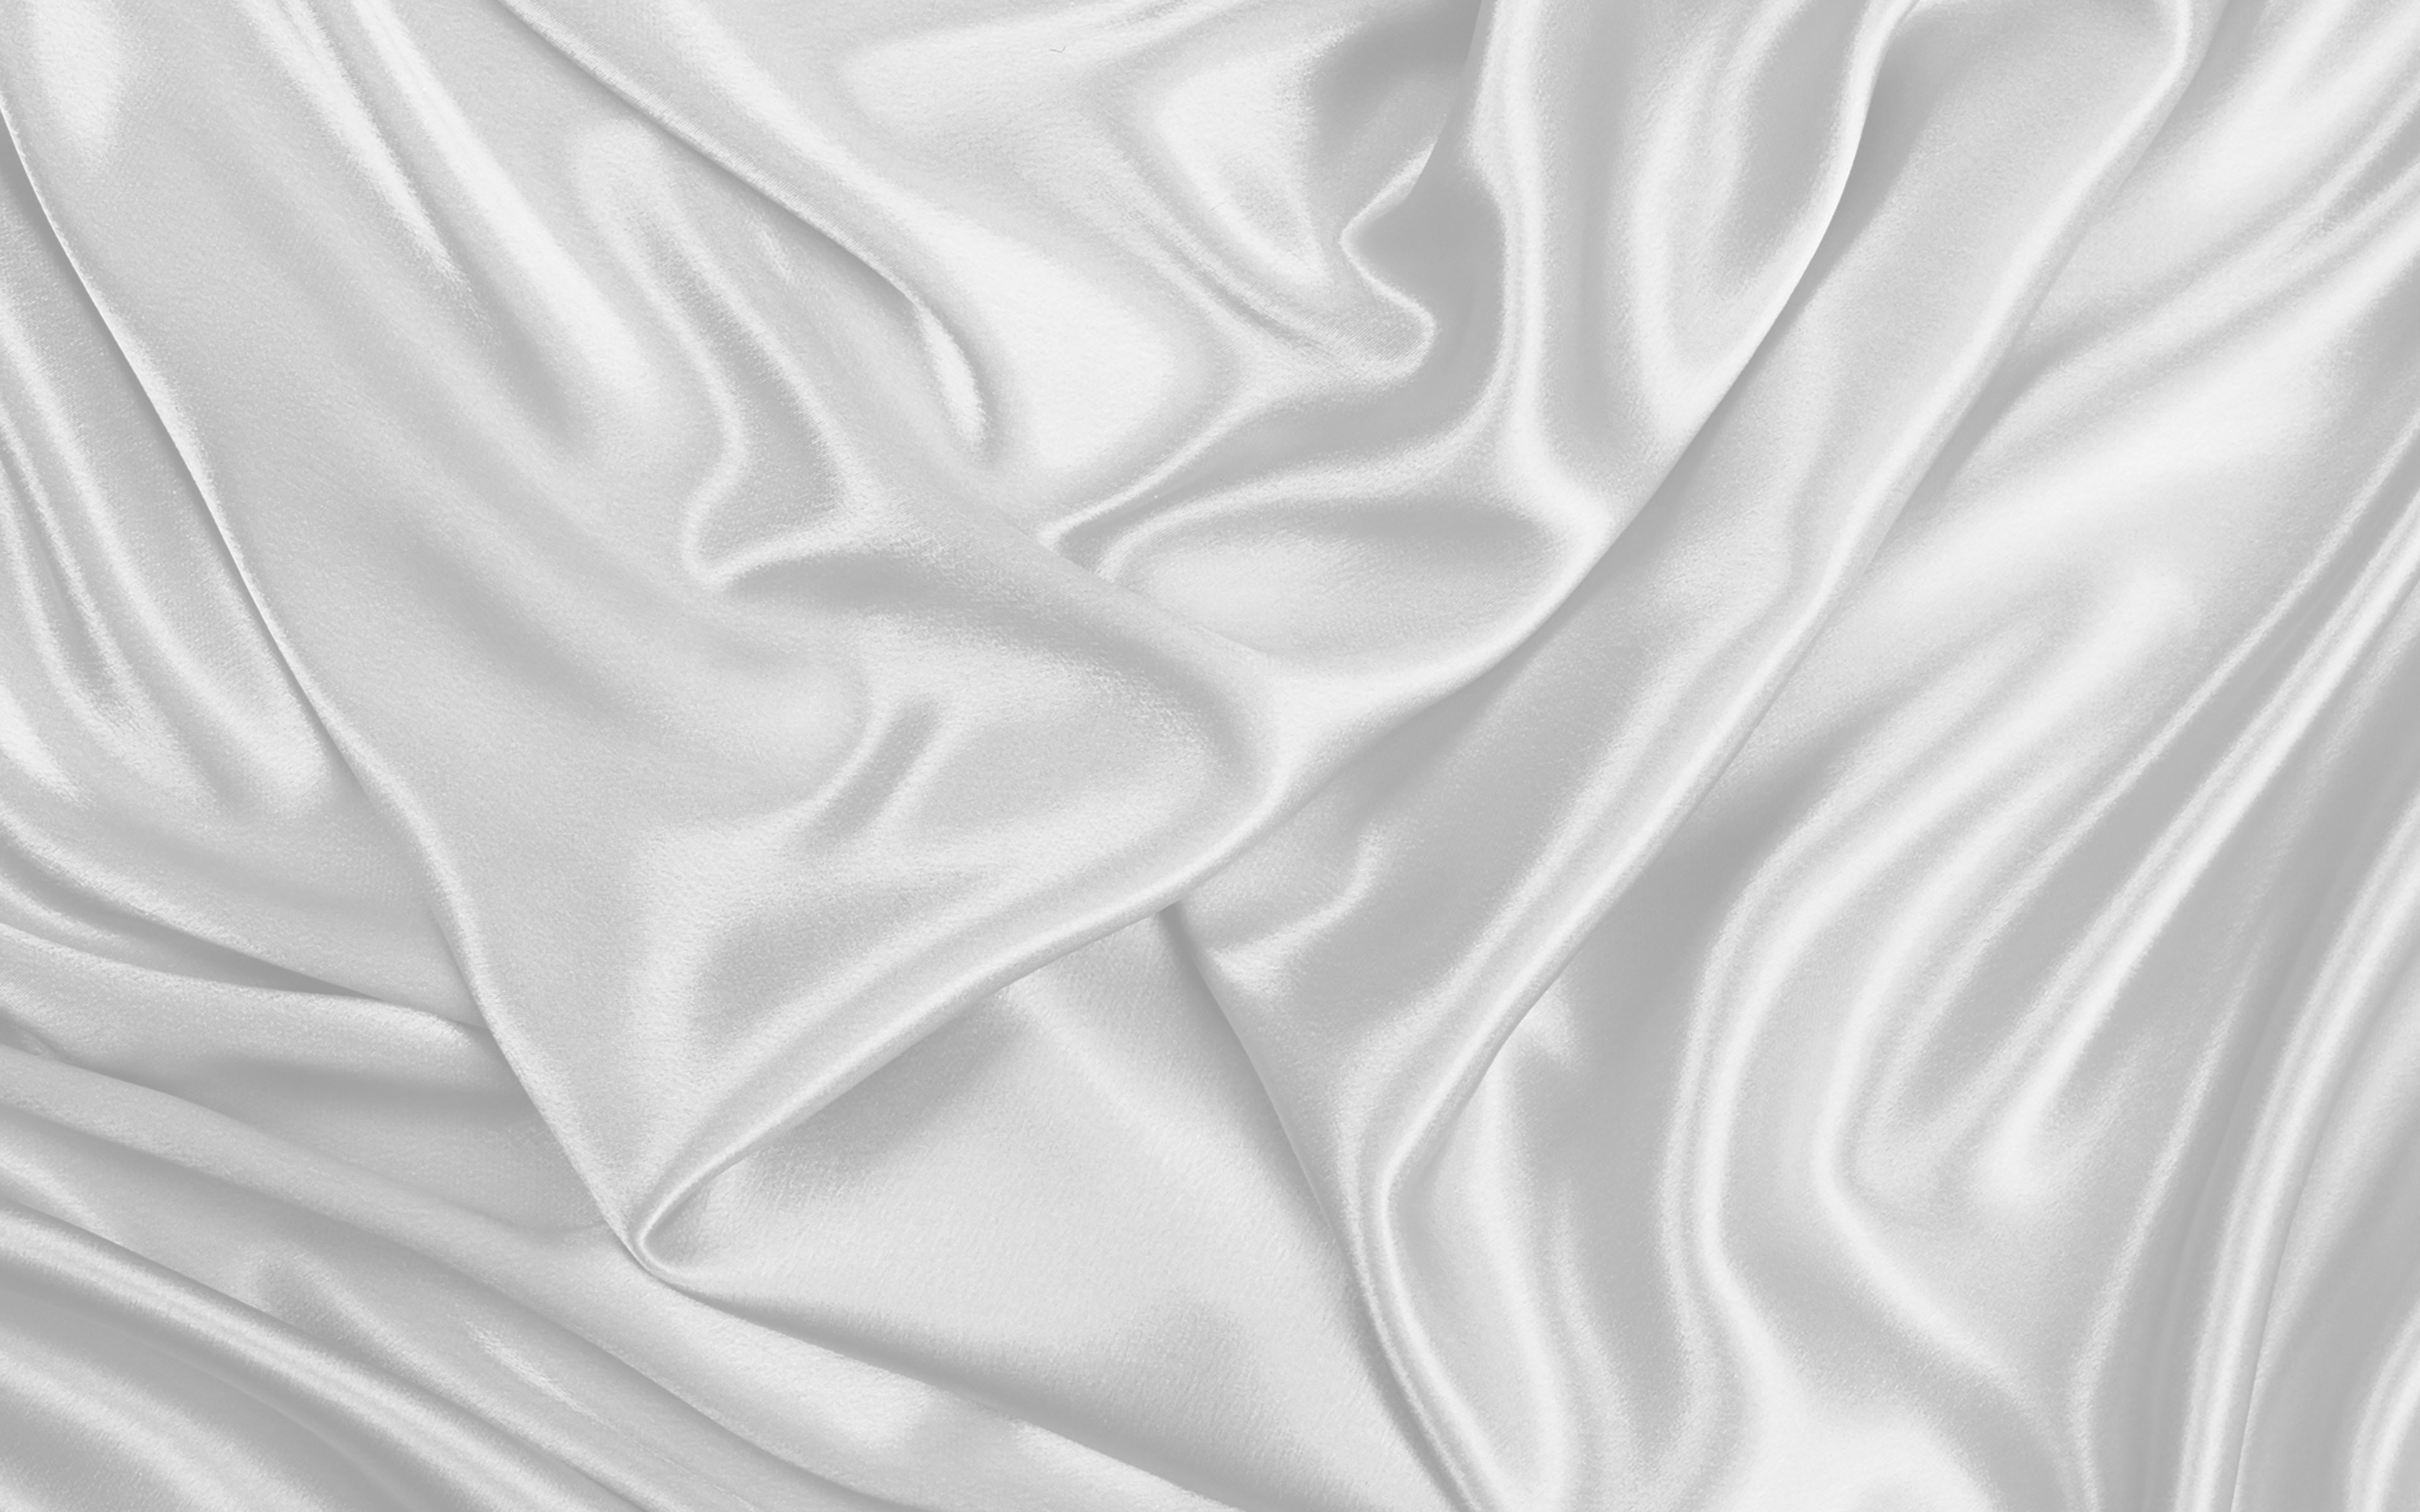 Download wallpaper white silk, 4k, white fabric texture, silk, white background, white satin, fabric textures, satin, silk textures for desktop with resolution 3840x2400. High Quality HD picture wallpaper